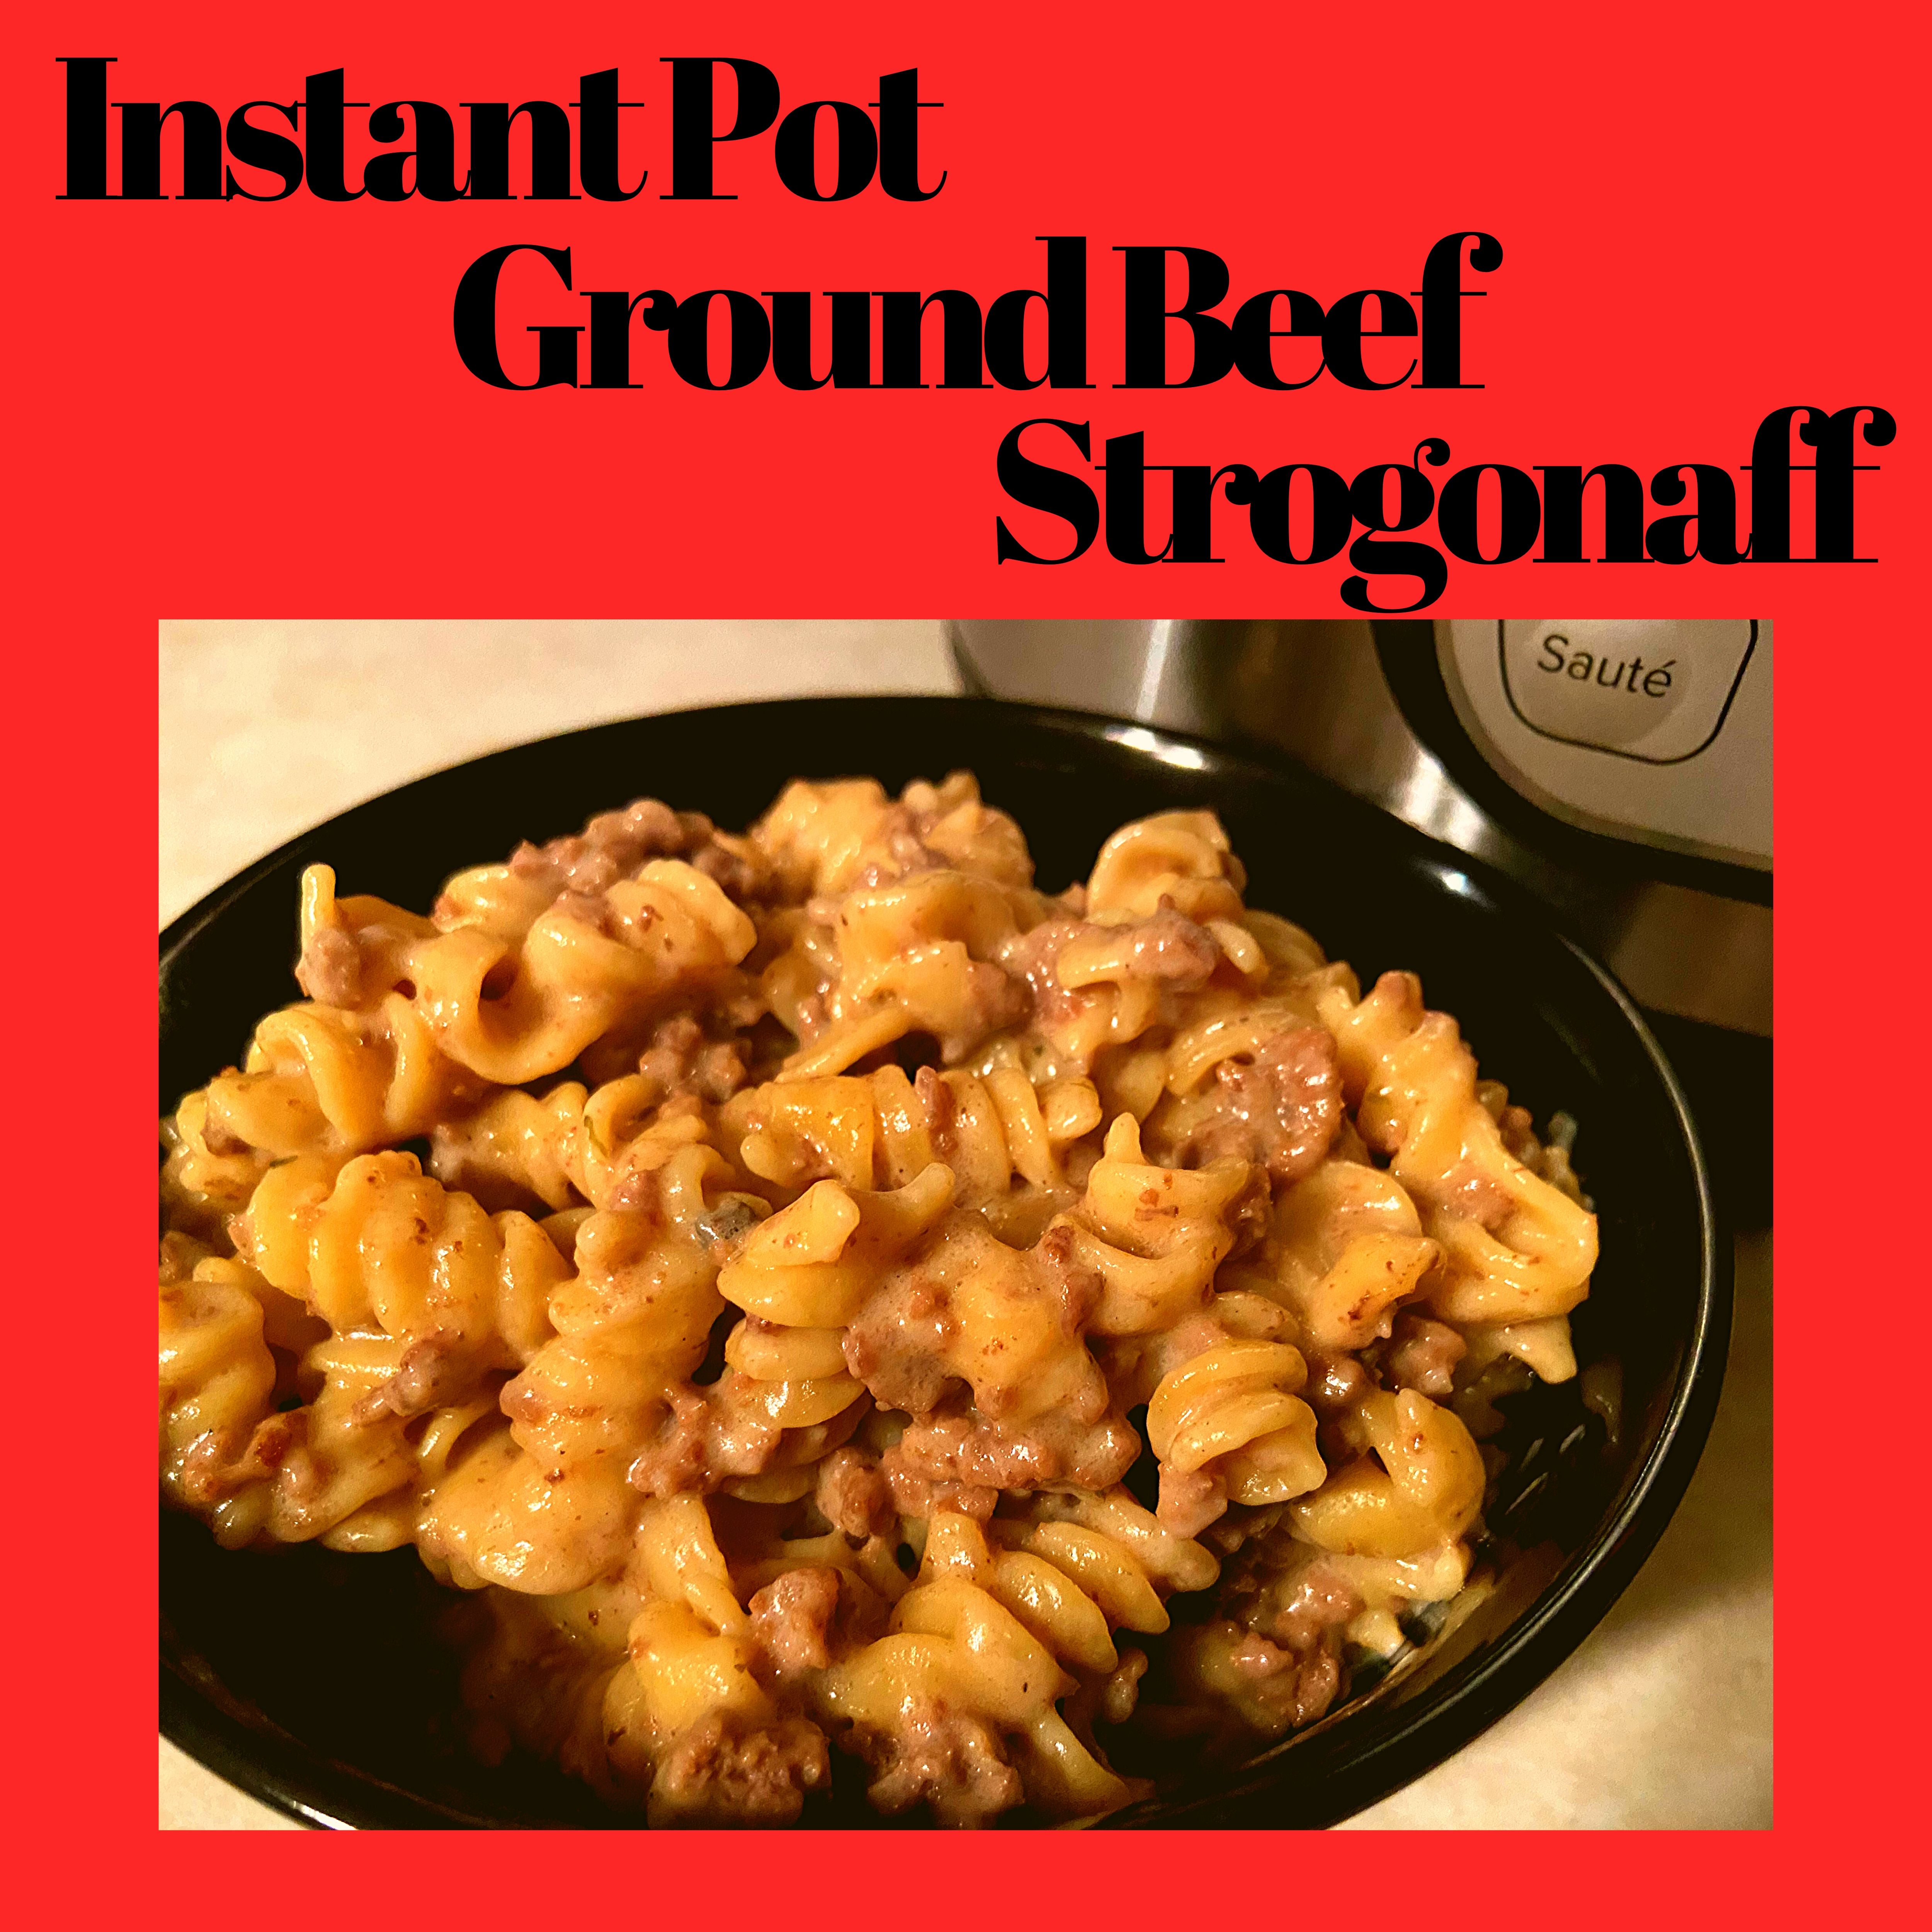 A black bowl filled with ground beef stroganoff sitting on a kitchen counter in front of an Instant Pot.